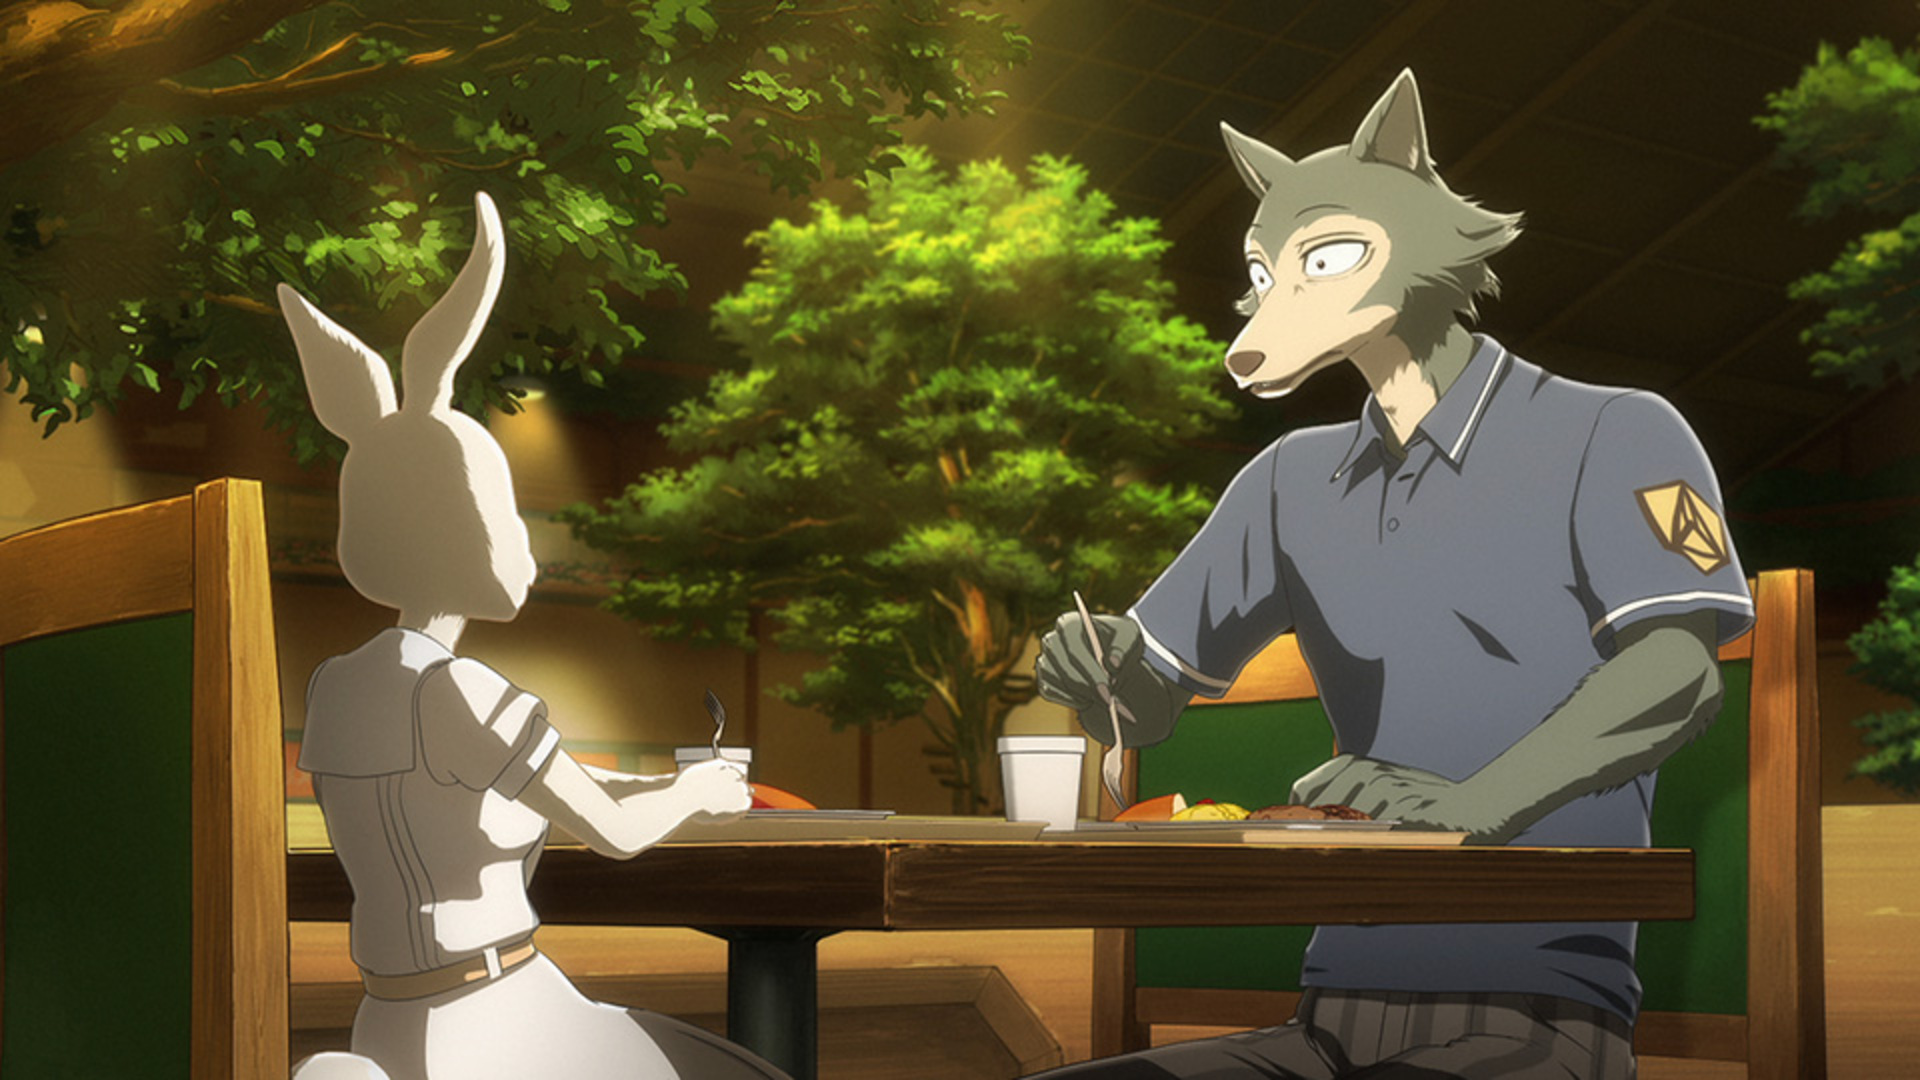 Beastars': An Anime About Animals That Has A Lot To Say About People